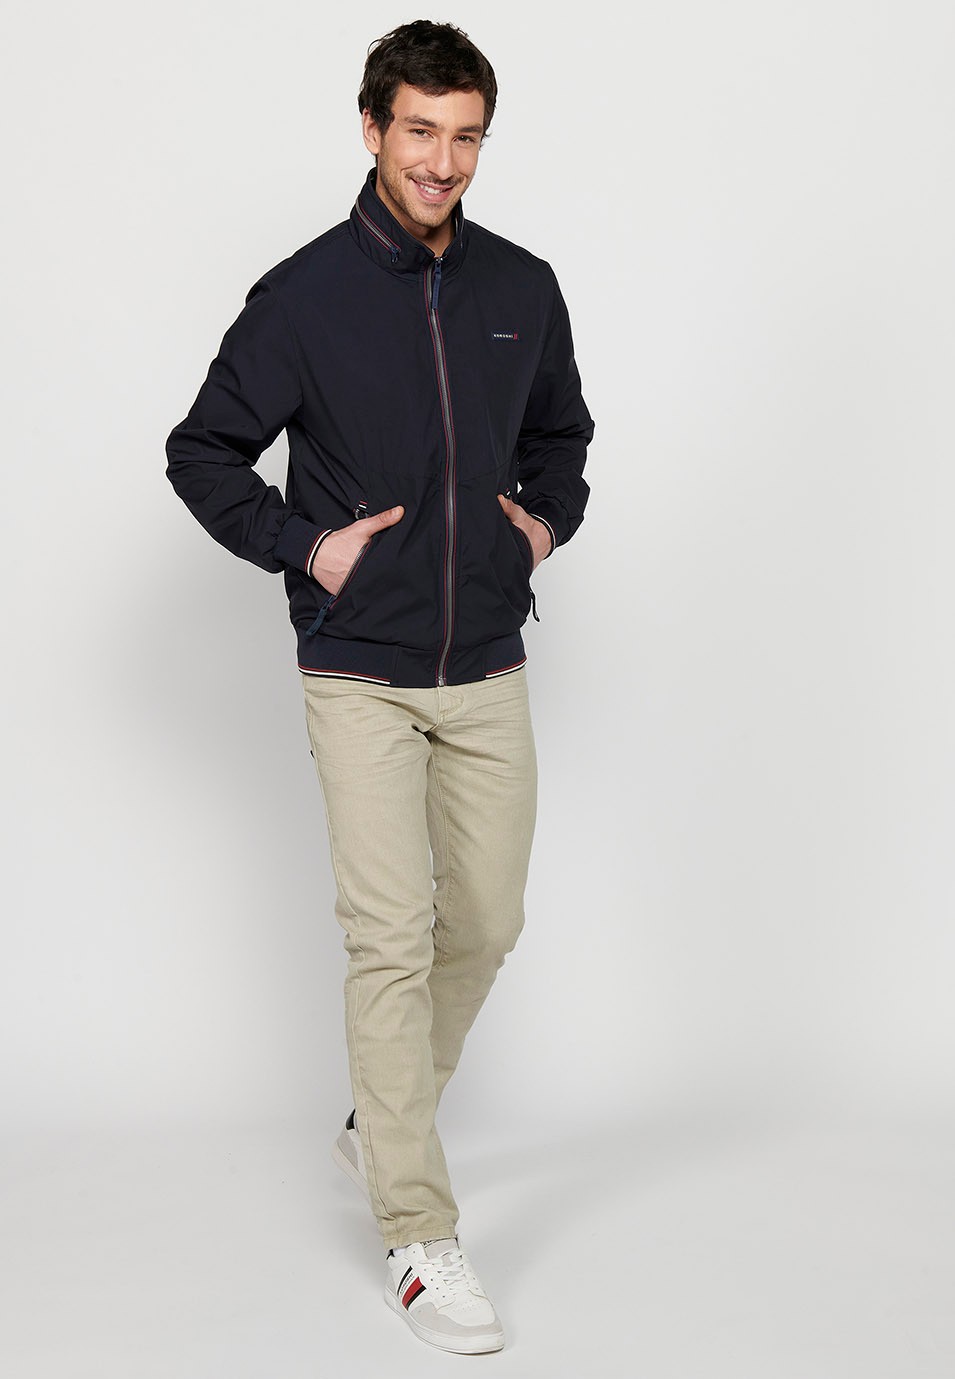 Long-sleeved high-neck jacket with front zipper closure and ribbed finishes with pockets, one inside in Navy for Men 3